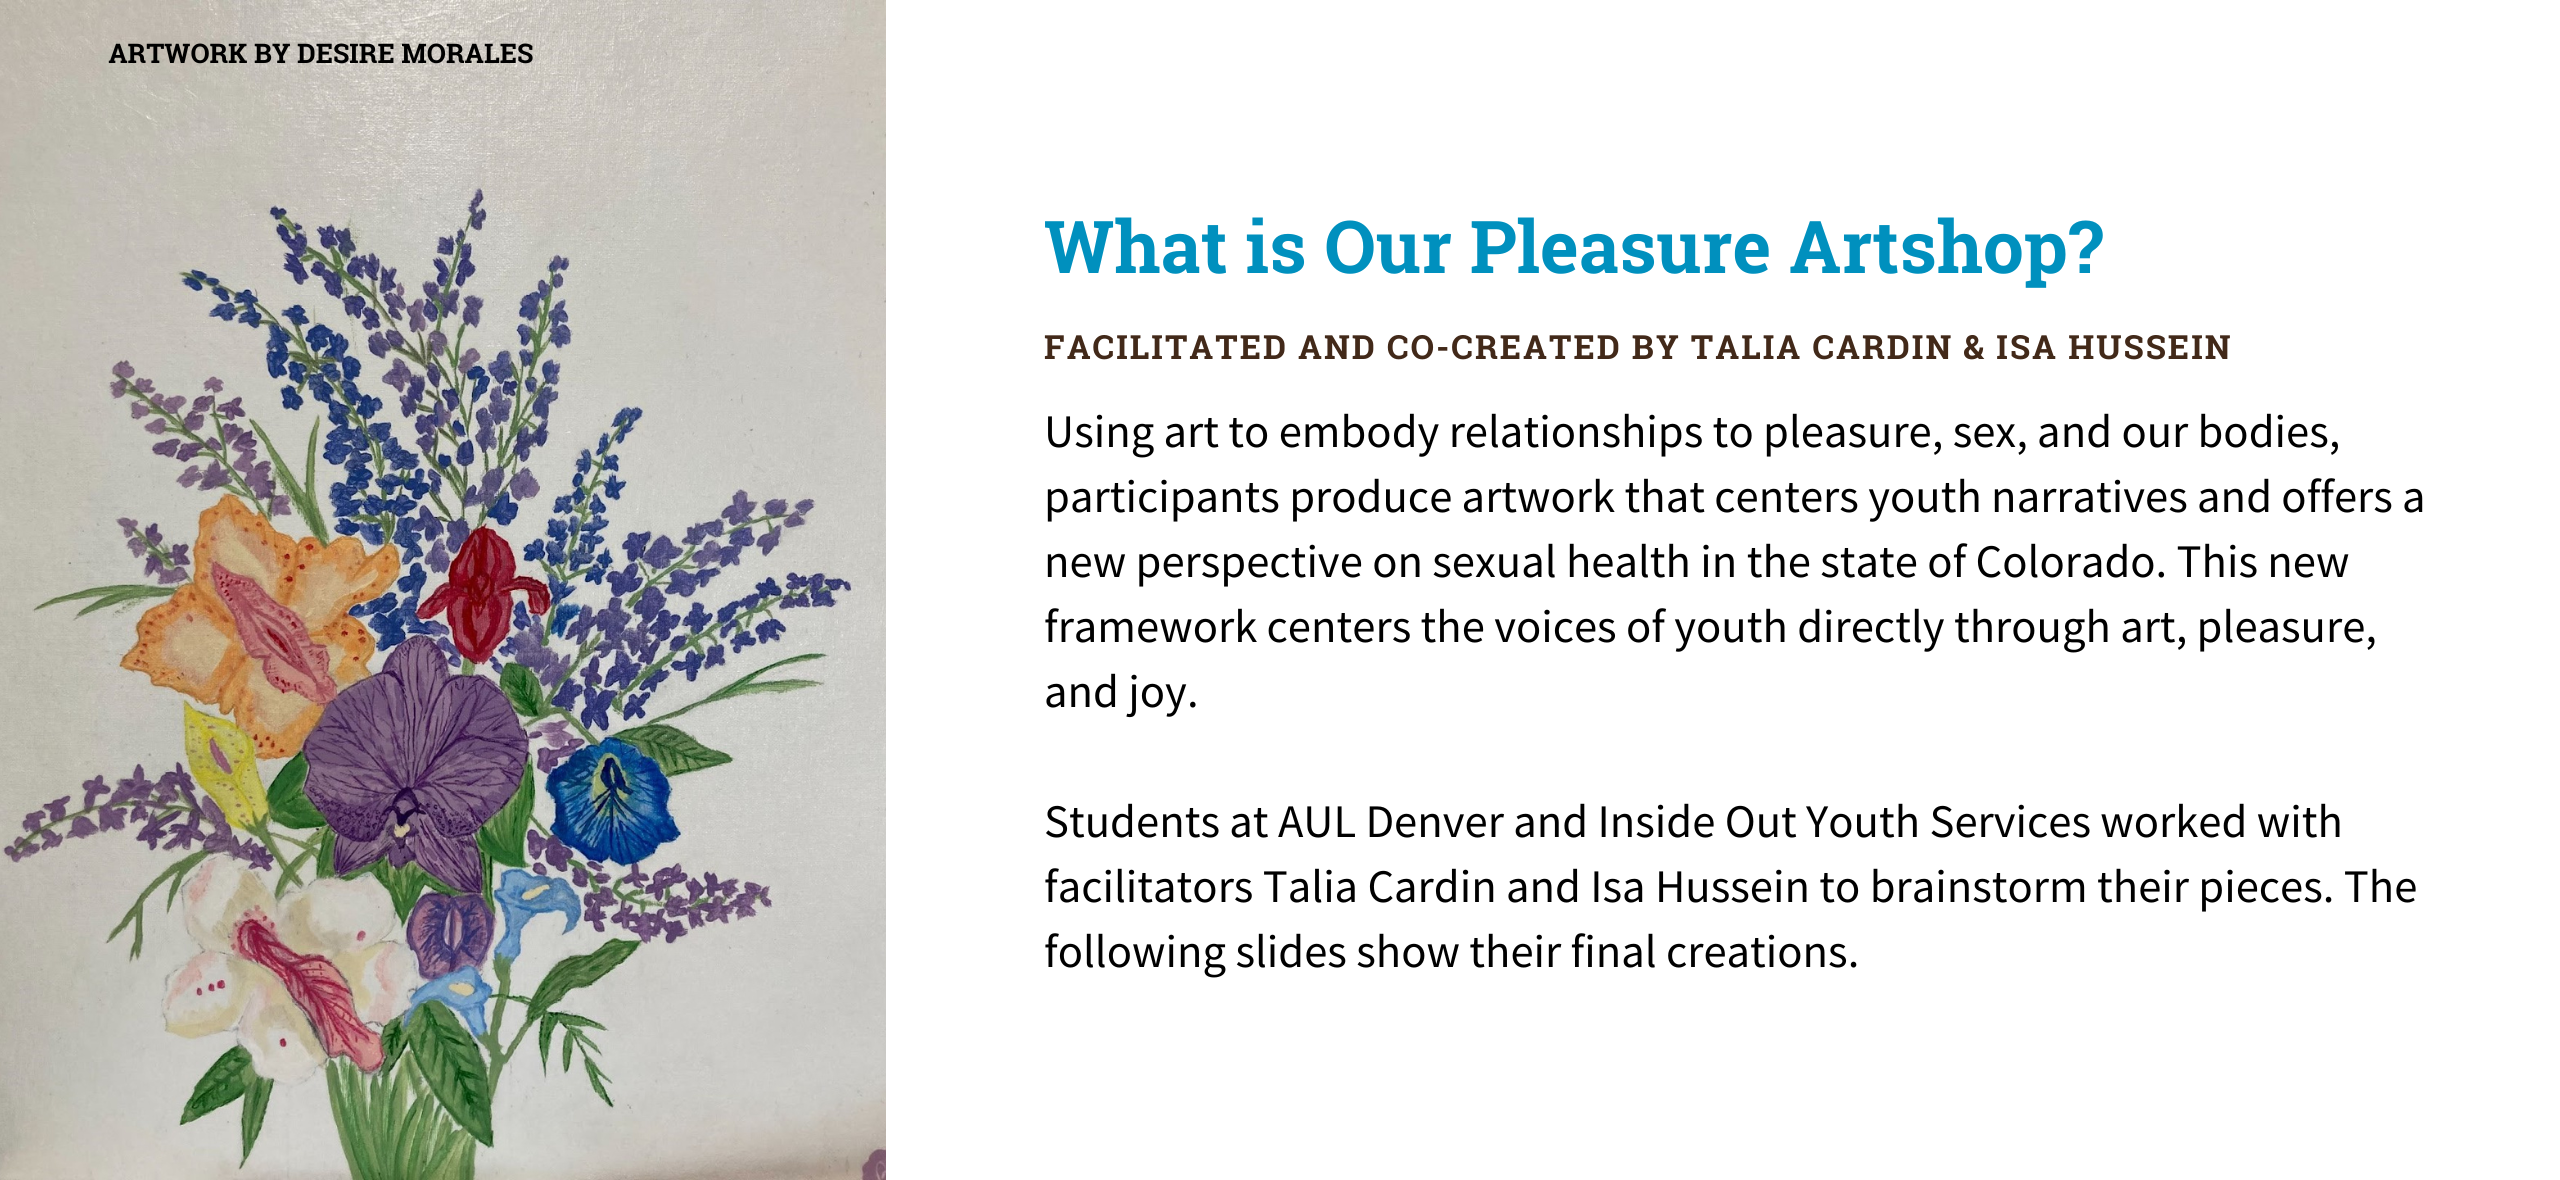 Using art to embody relationships to pleasure, sex, and our bodies, participants produce artwork that centers youth narratives and offers a new perspective on sexual health in the state of Colorado. This new framework centers the voices of youth directly through art, pleasure, and joy.